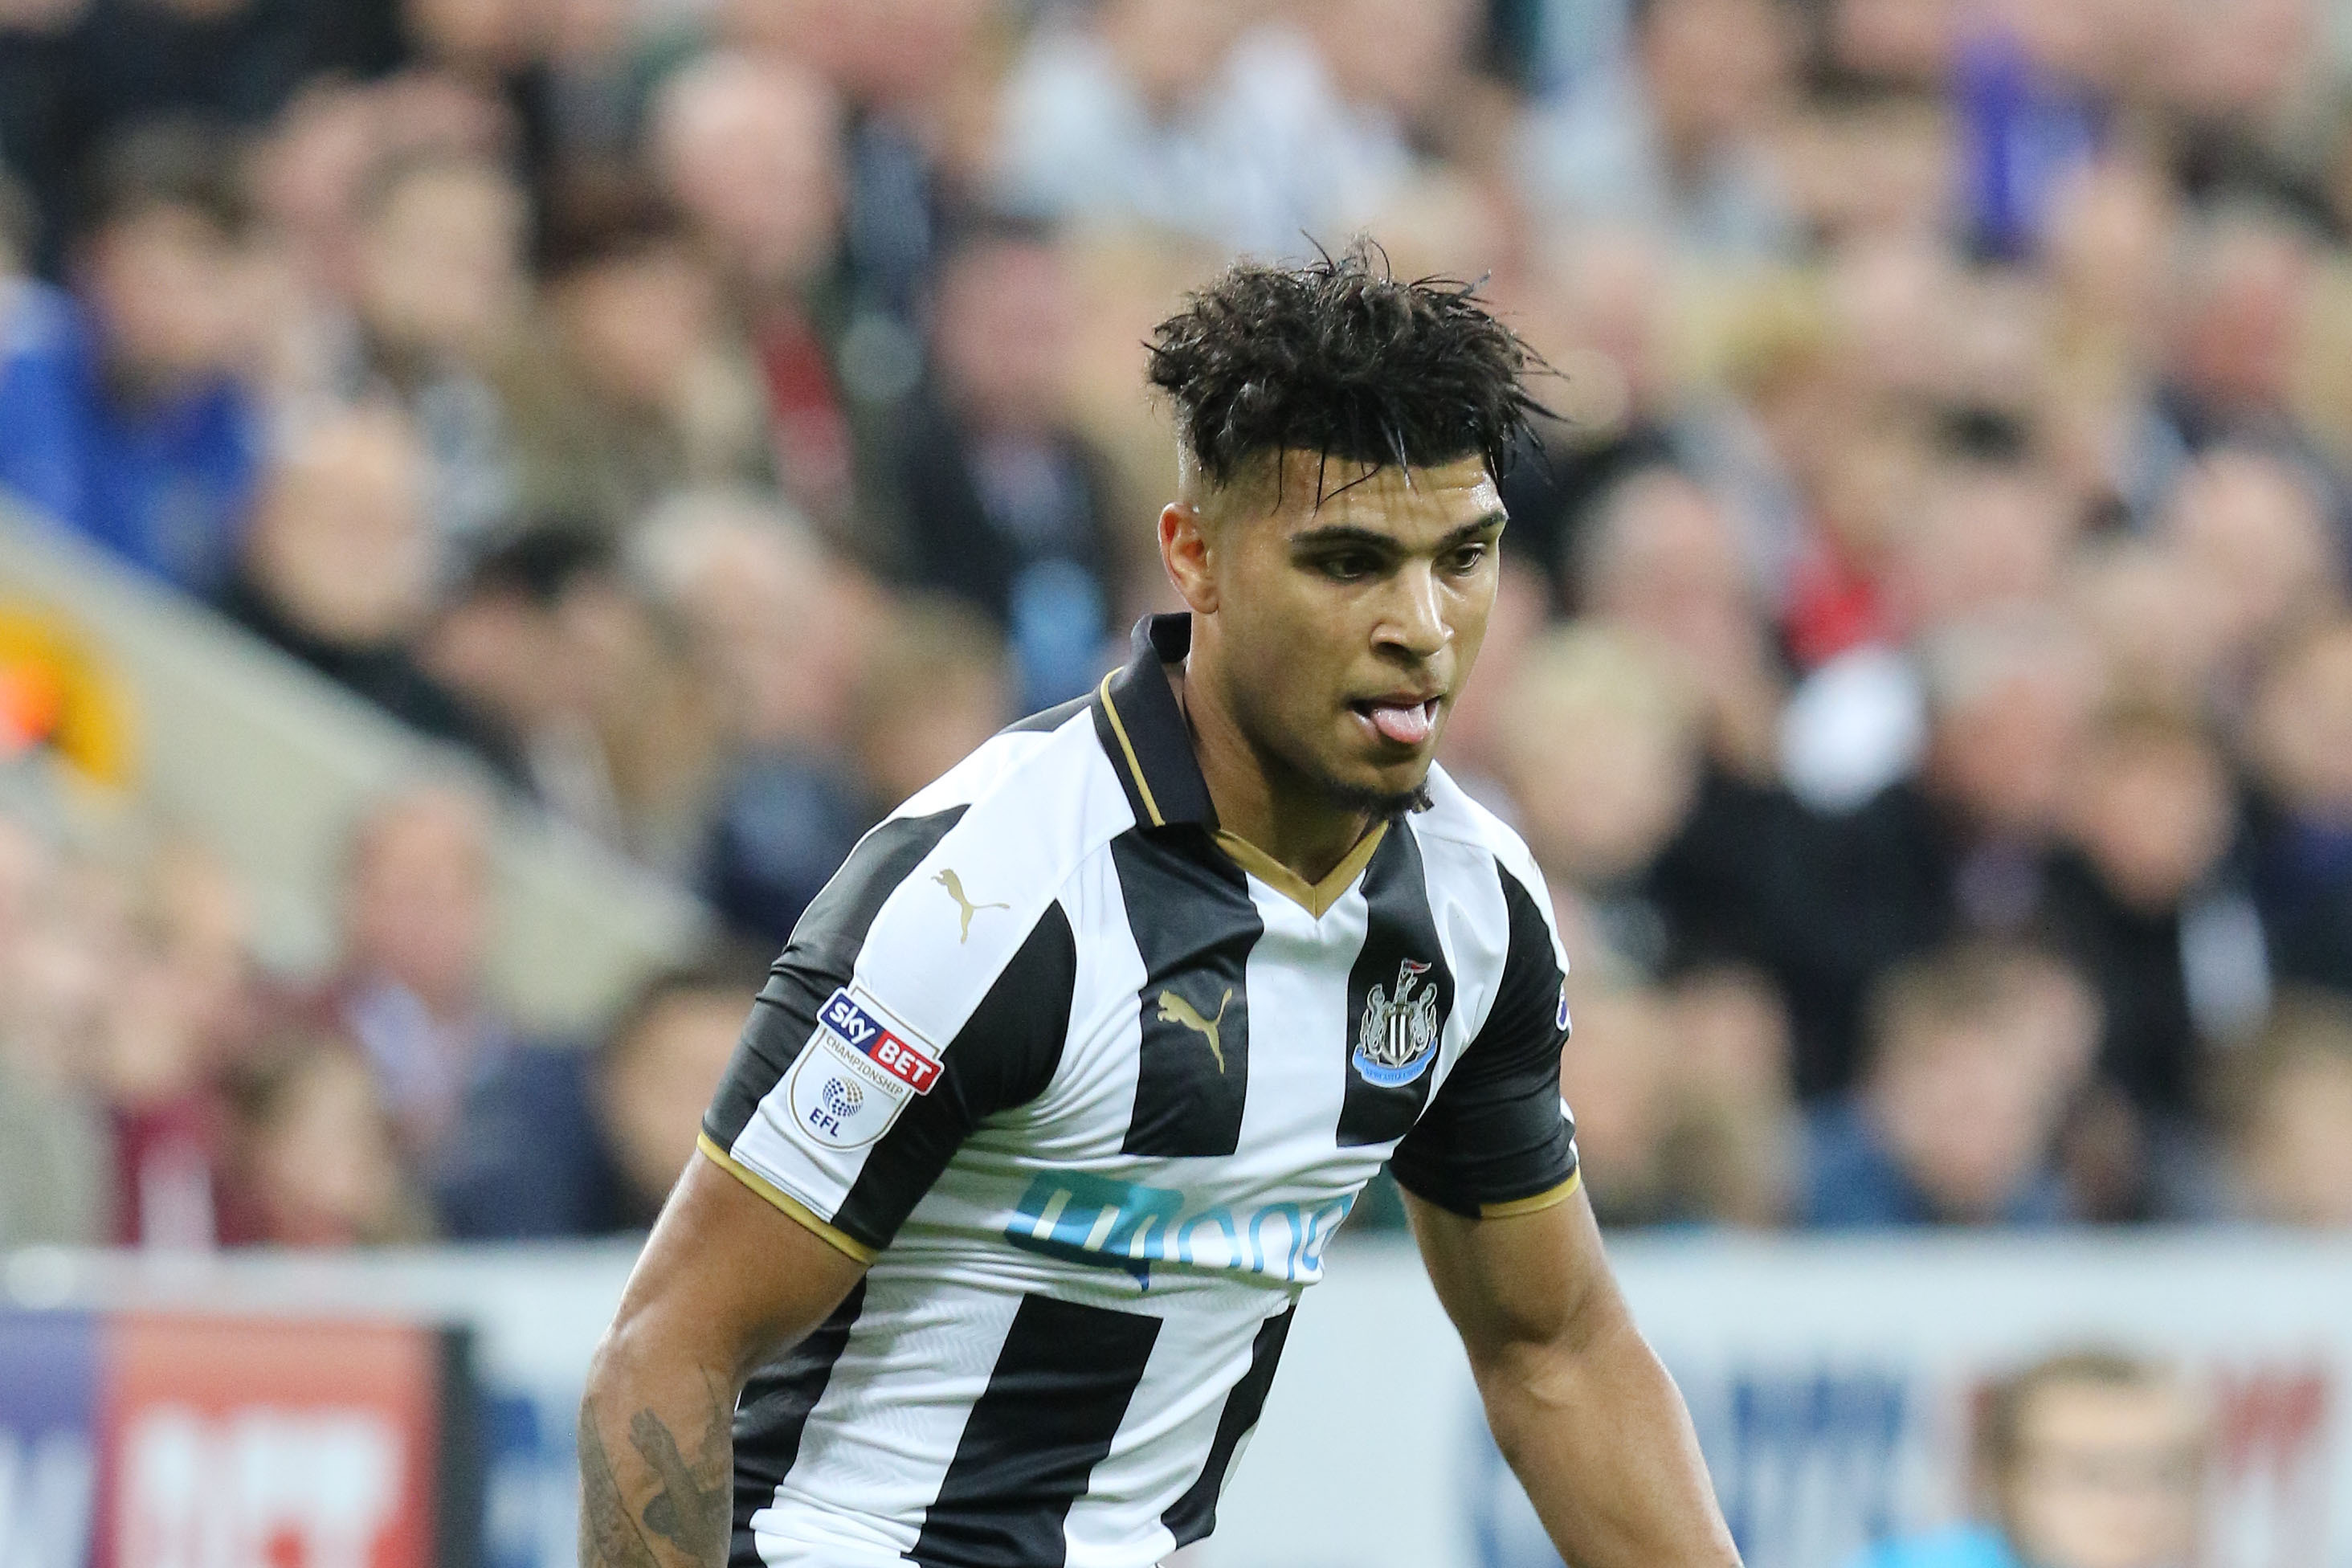 NEWCASTLE UPON TYNE, ENGLAND - SEPTEMBER 20: DeAndre Yedlin of Newcastle United during the EFL Cup third round match between Newcastle United and Wolverhampton Wanderers at St James' Park on September 20, 2016 in Newcastle upon Tyne, England. (Photo by Ian Horrocks/Getty Images)